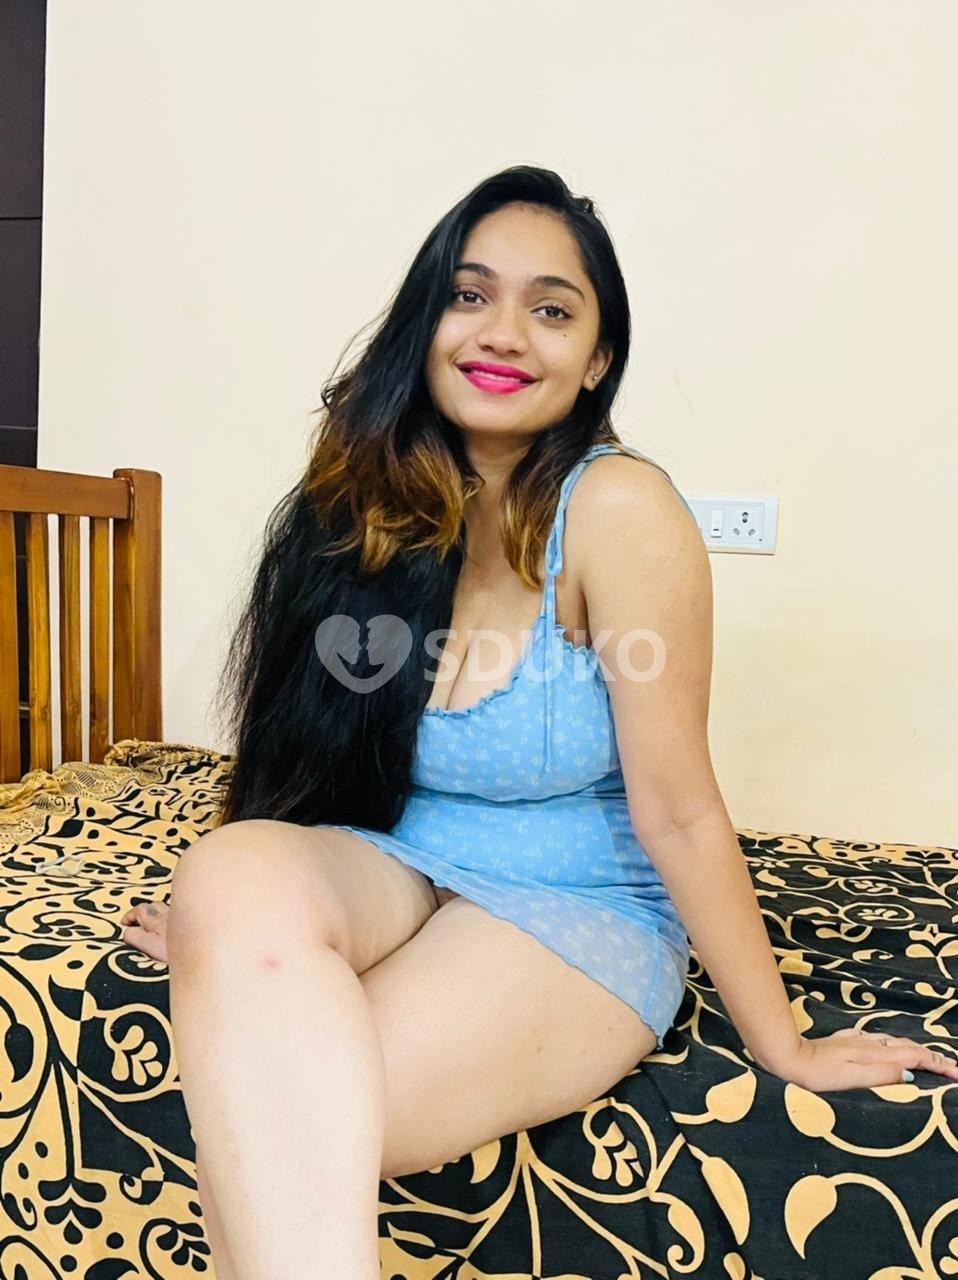 Nagda ✅ Low price best vip call girls sarvice Full saf and secure in call out call available